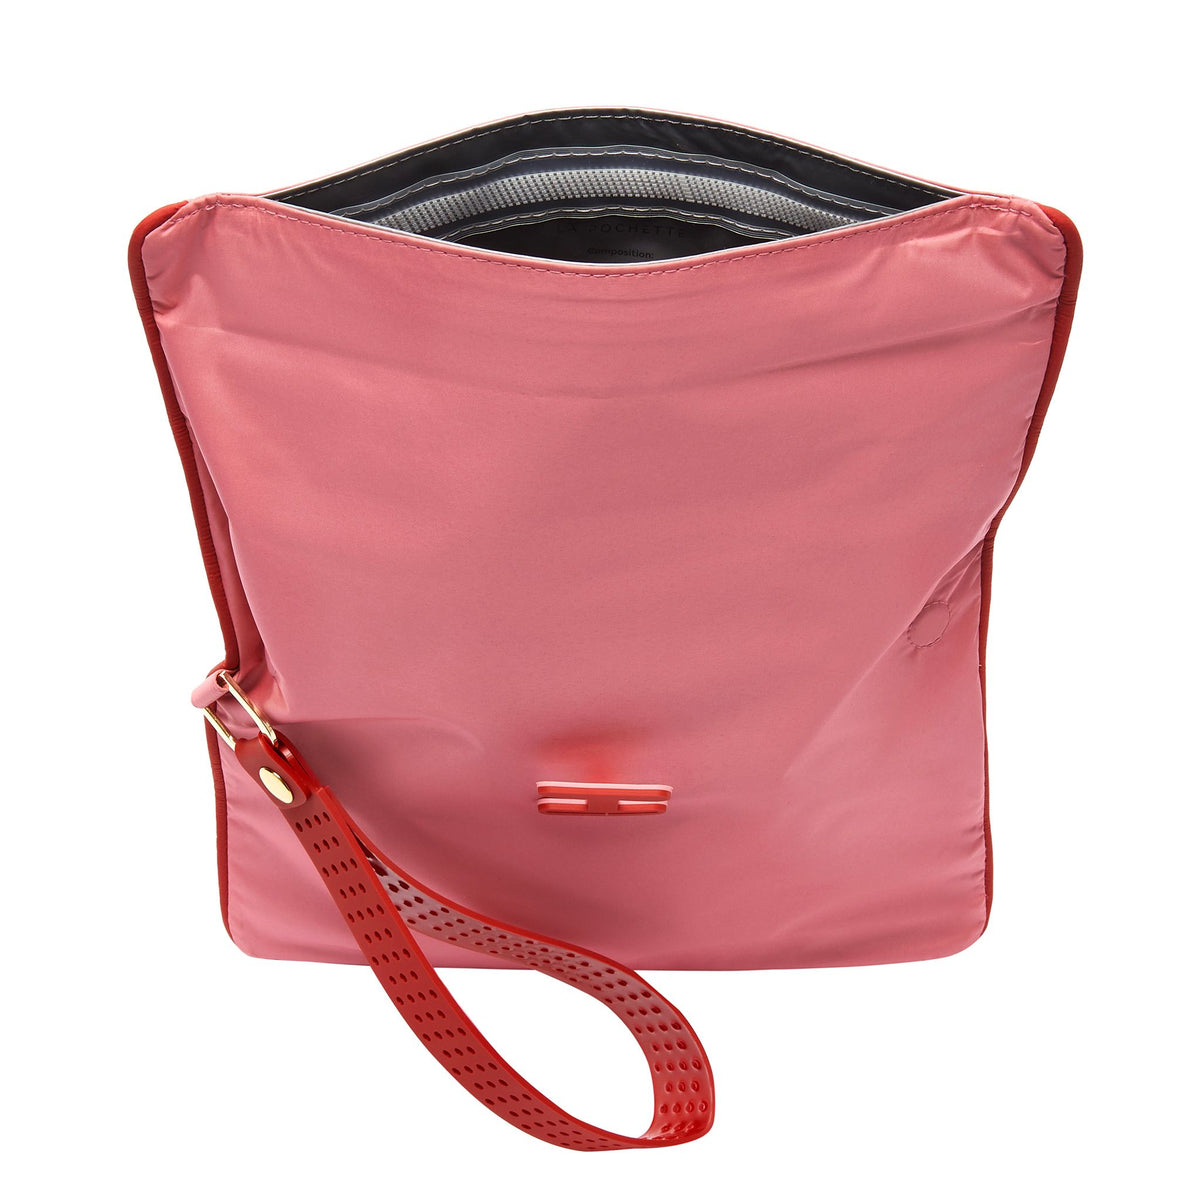 Small wet bag in Peony and Chilli open, and showing waterproof lining 